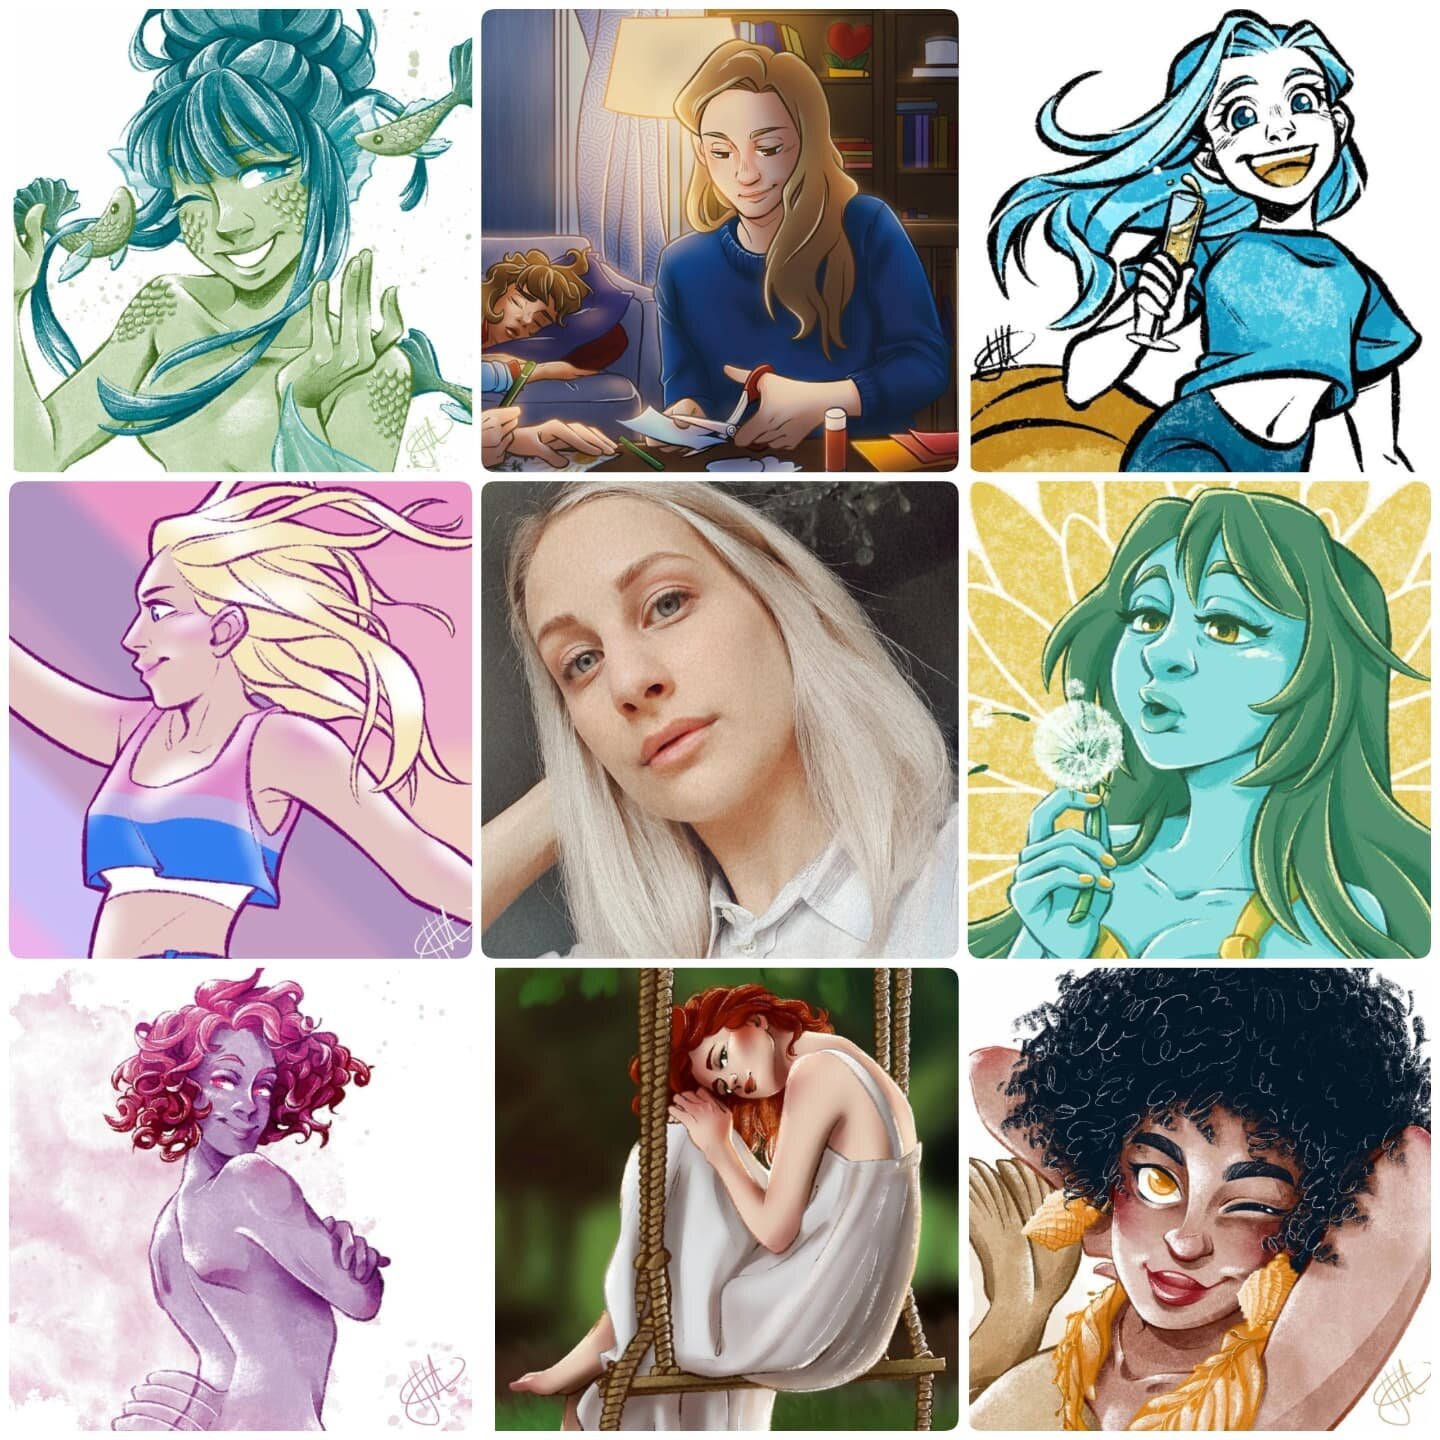 🌸 #artvsartist2021 🌸

I just got a new job (🎉) and didn't have any time to draw for myself lately. But I wanna make time for that over the holidays and I'll do my best to find a balance in the new year. 💕

~~~~~~~~~~~~~~~~~~~~~~~~~~~~~~~~~~
#artv